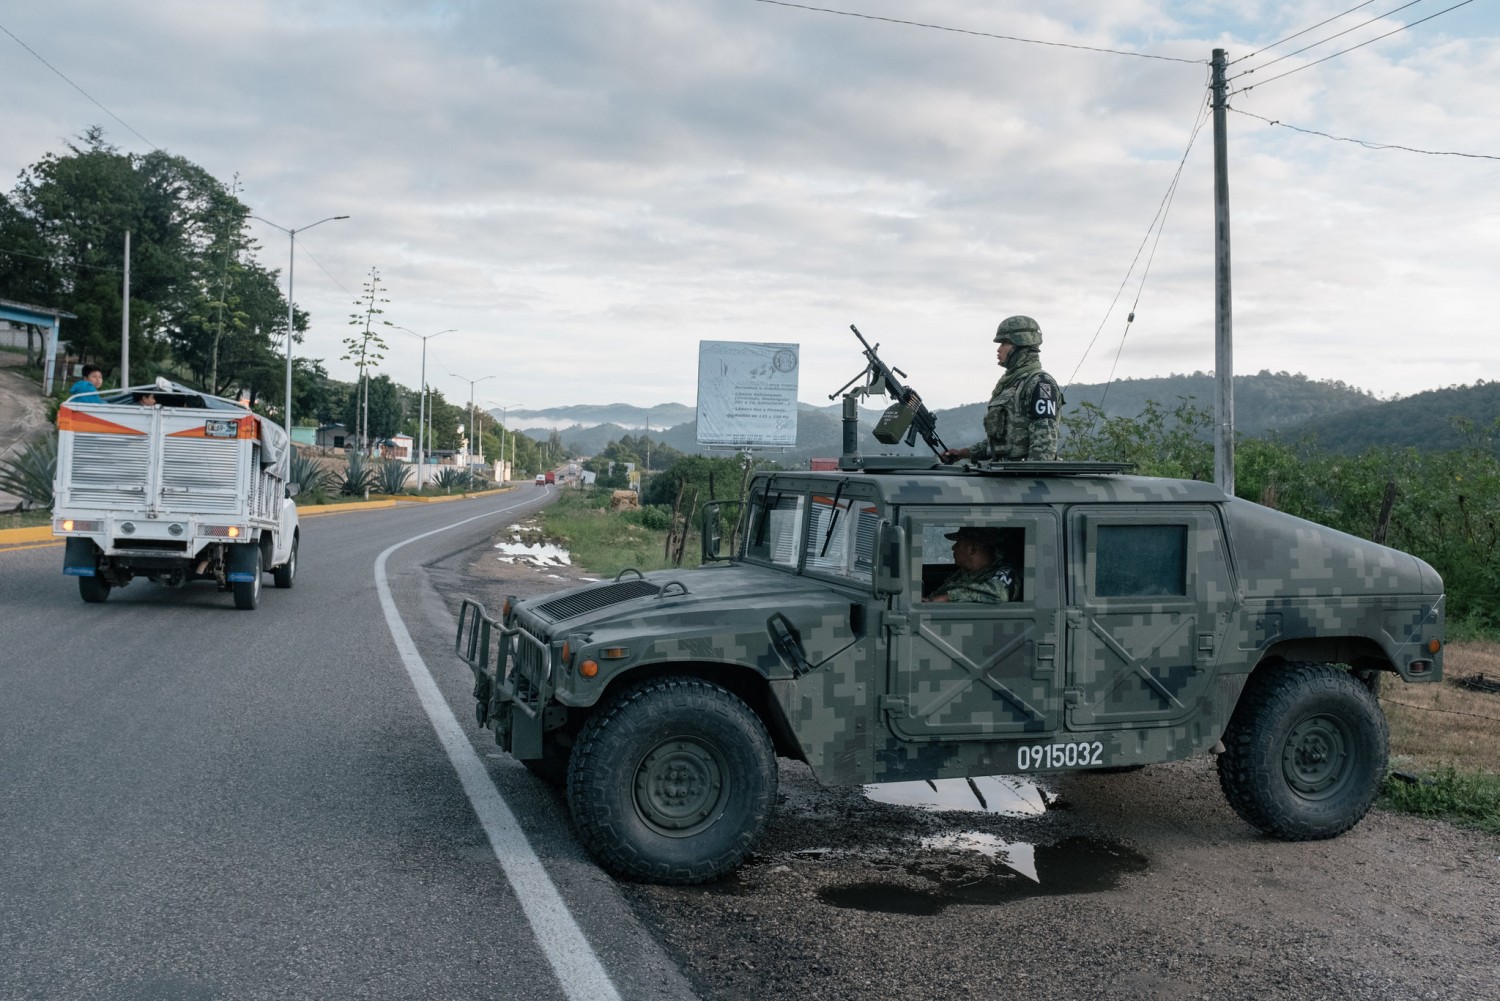 Soldiers working with Mexico’s National Guard waiting at an immigration checkpoint in southern Mexico this month.CreditLuis Antonio Rojas for The New York Times